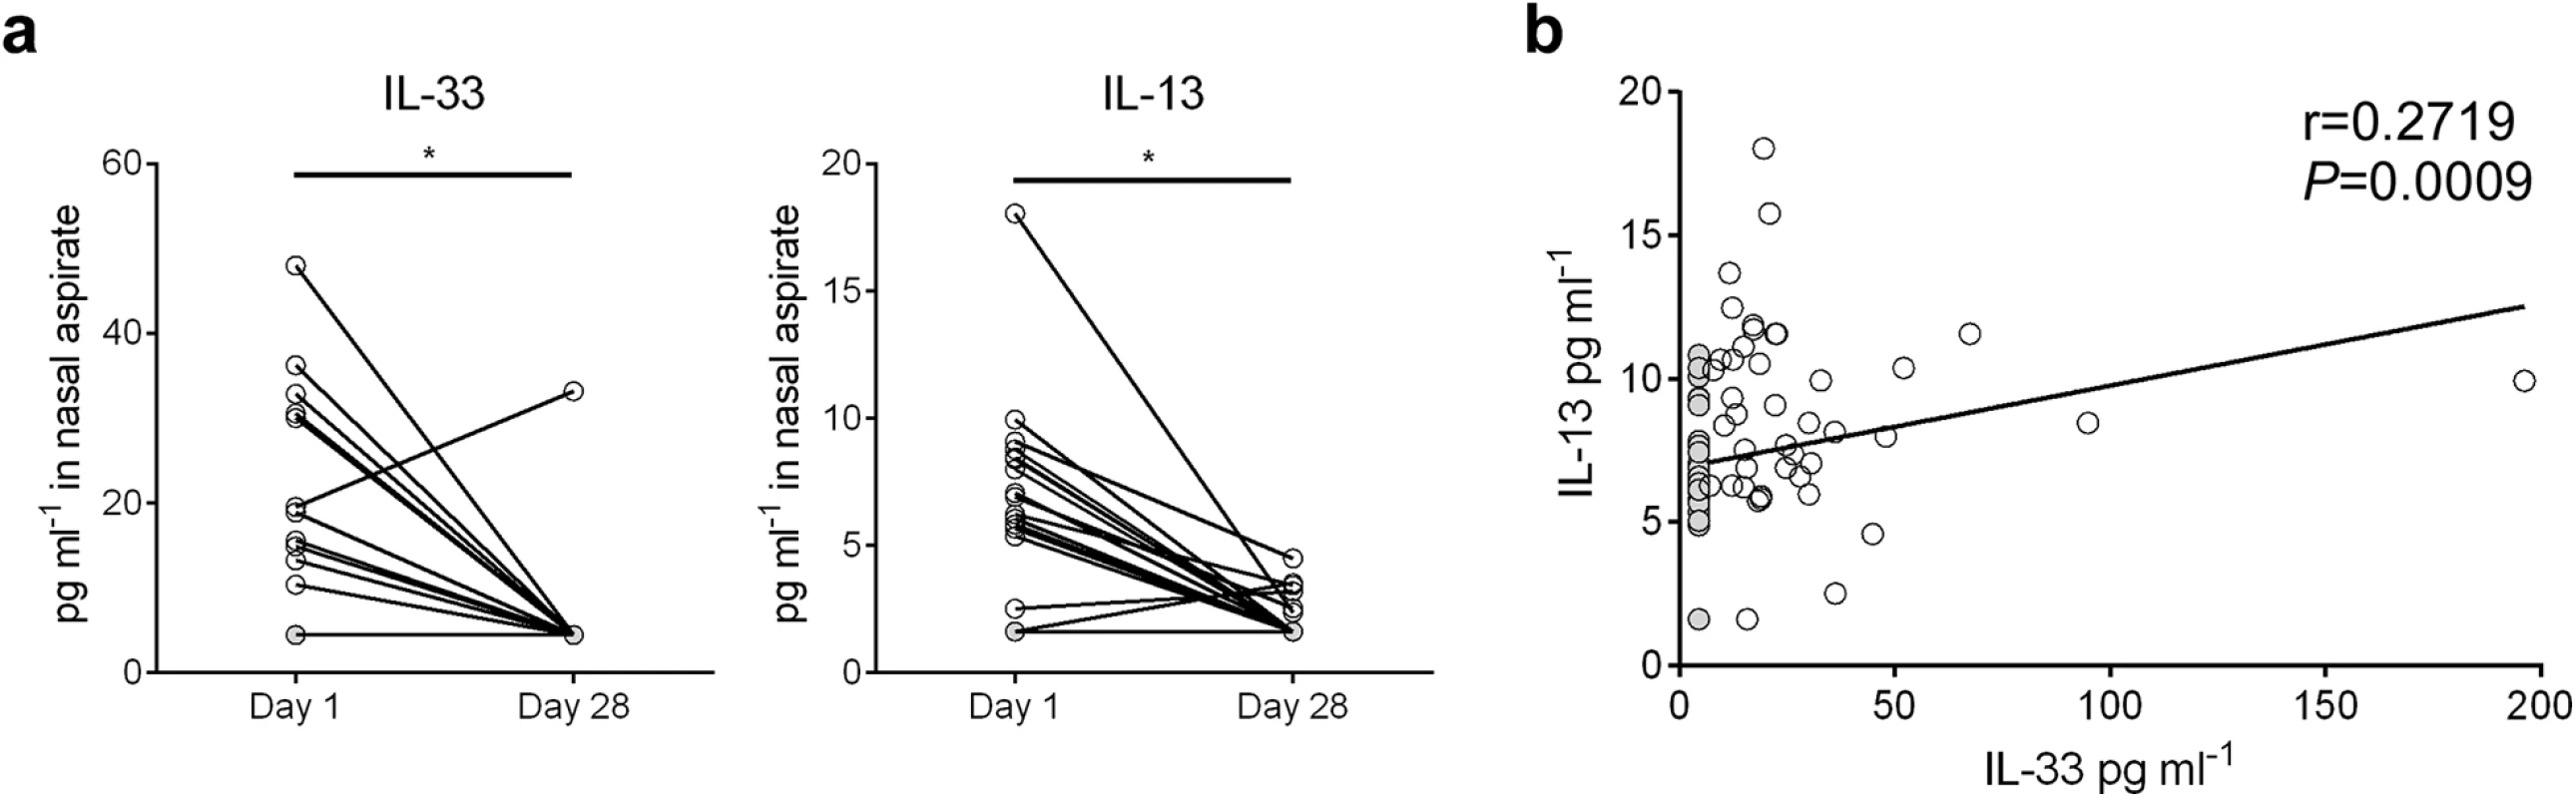 IL-33 and IL-13 concentrations are elevated in nasal aspirates from infants hospitalized with RSV infection.